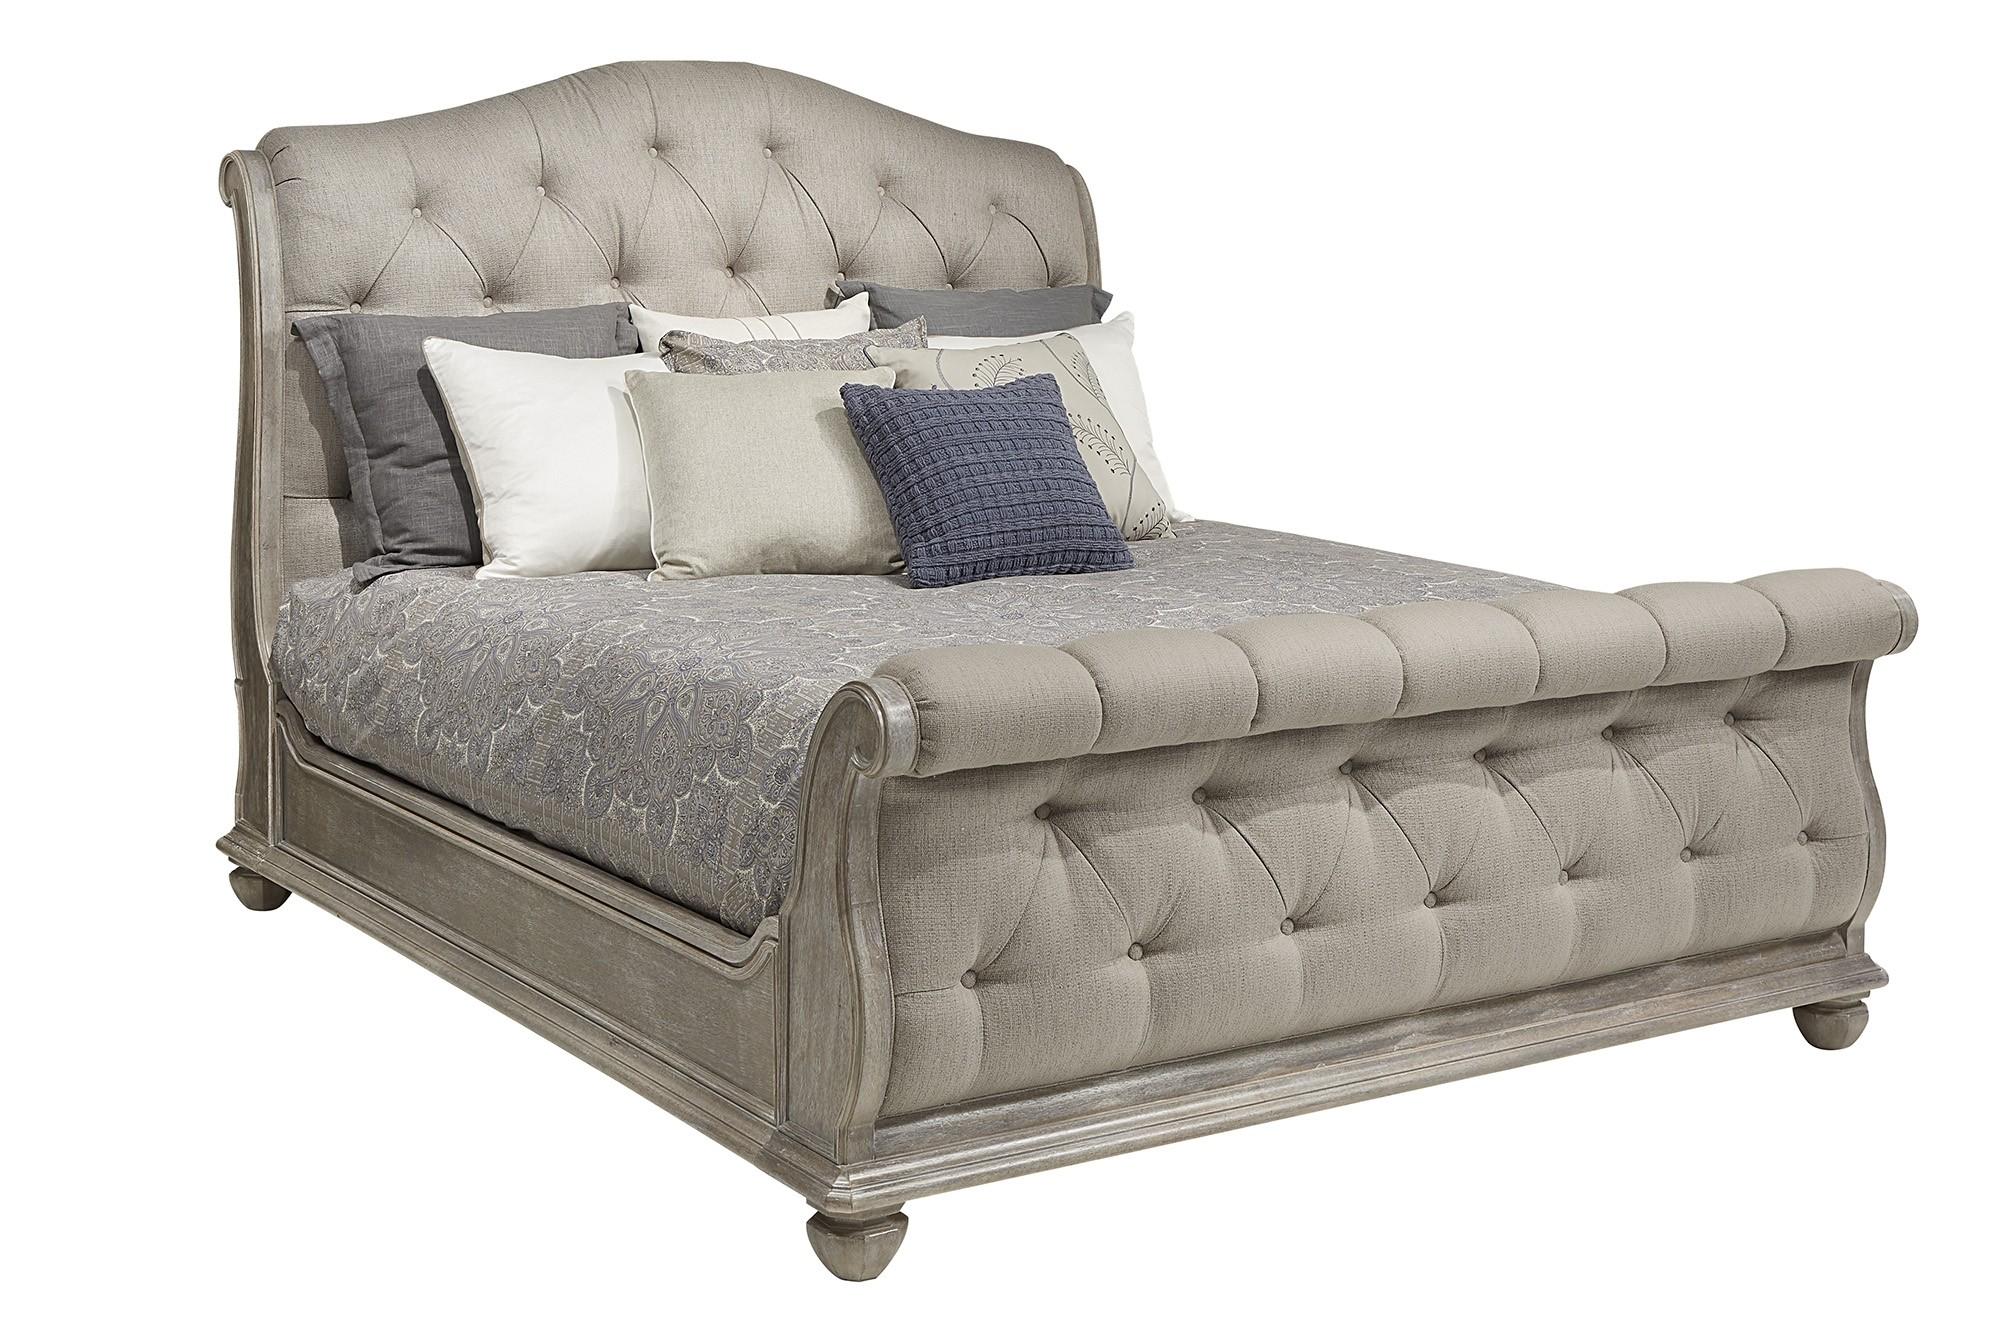 

    
Traditional Oak Finish Tufted Upholstered King Sleigh Bed  HD-80005
